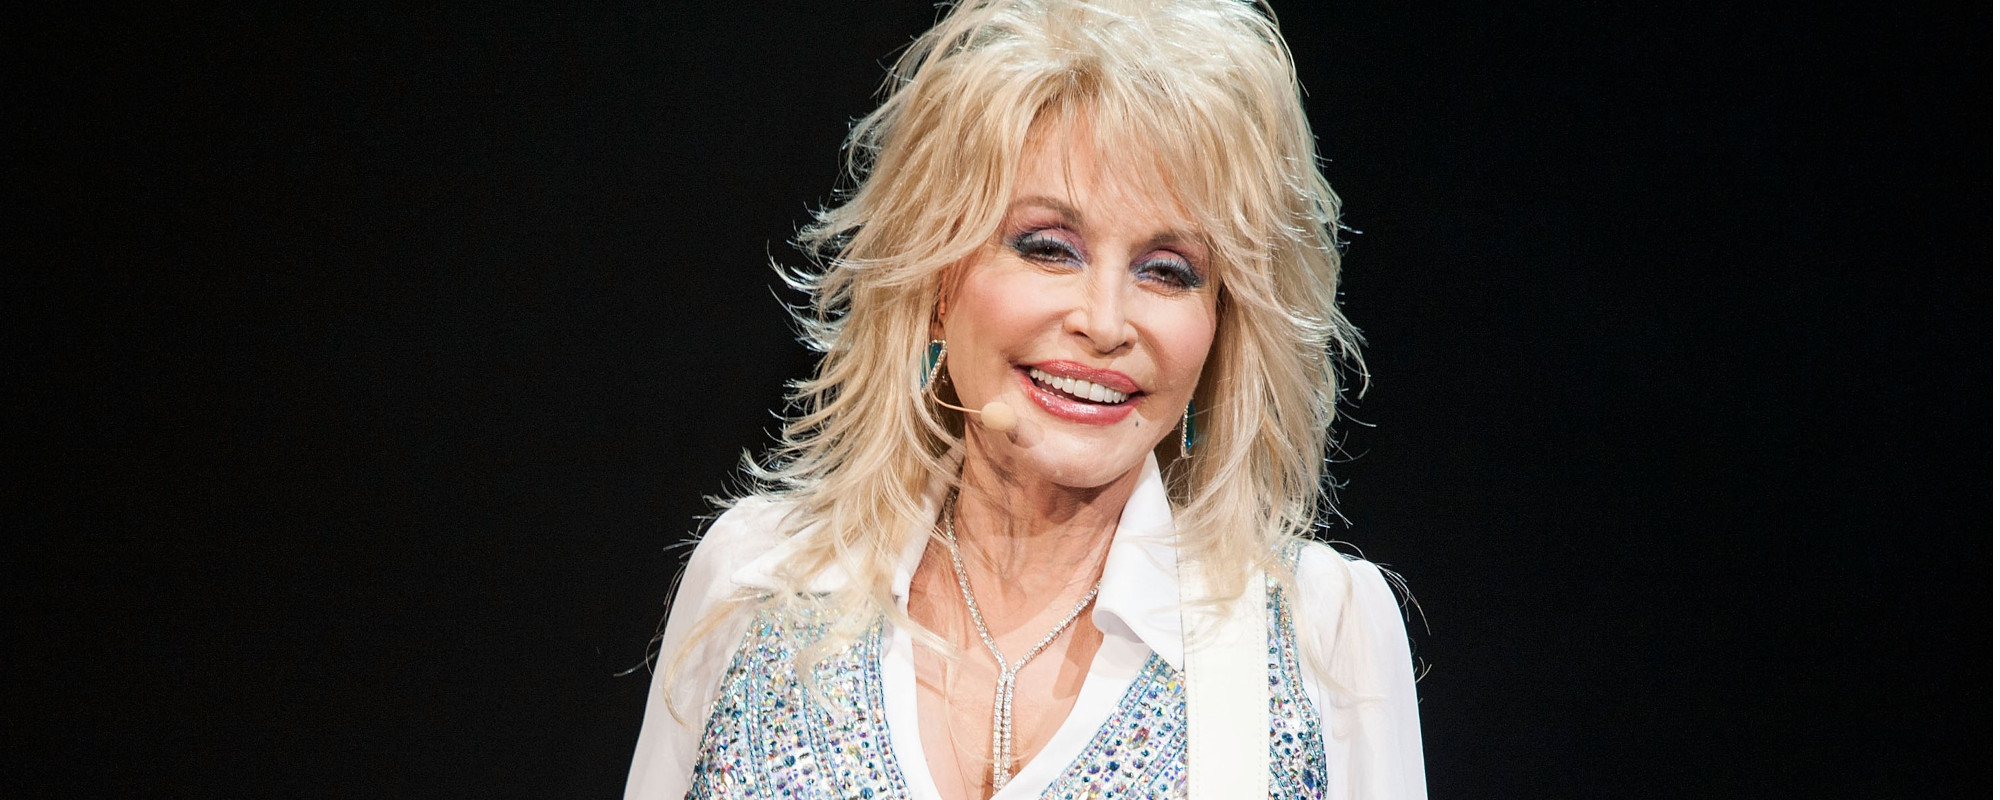 Dolly Parton Drops Surprise New Tracks From ‘Rockstar’ for Her 78th Birthday—and Fans Are Loving It